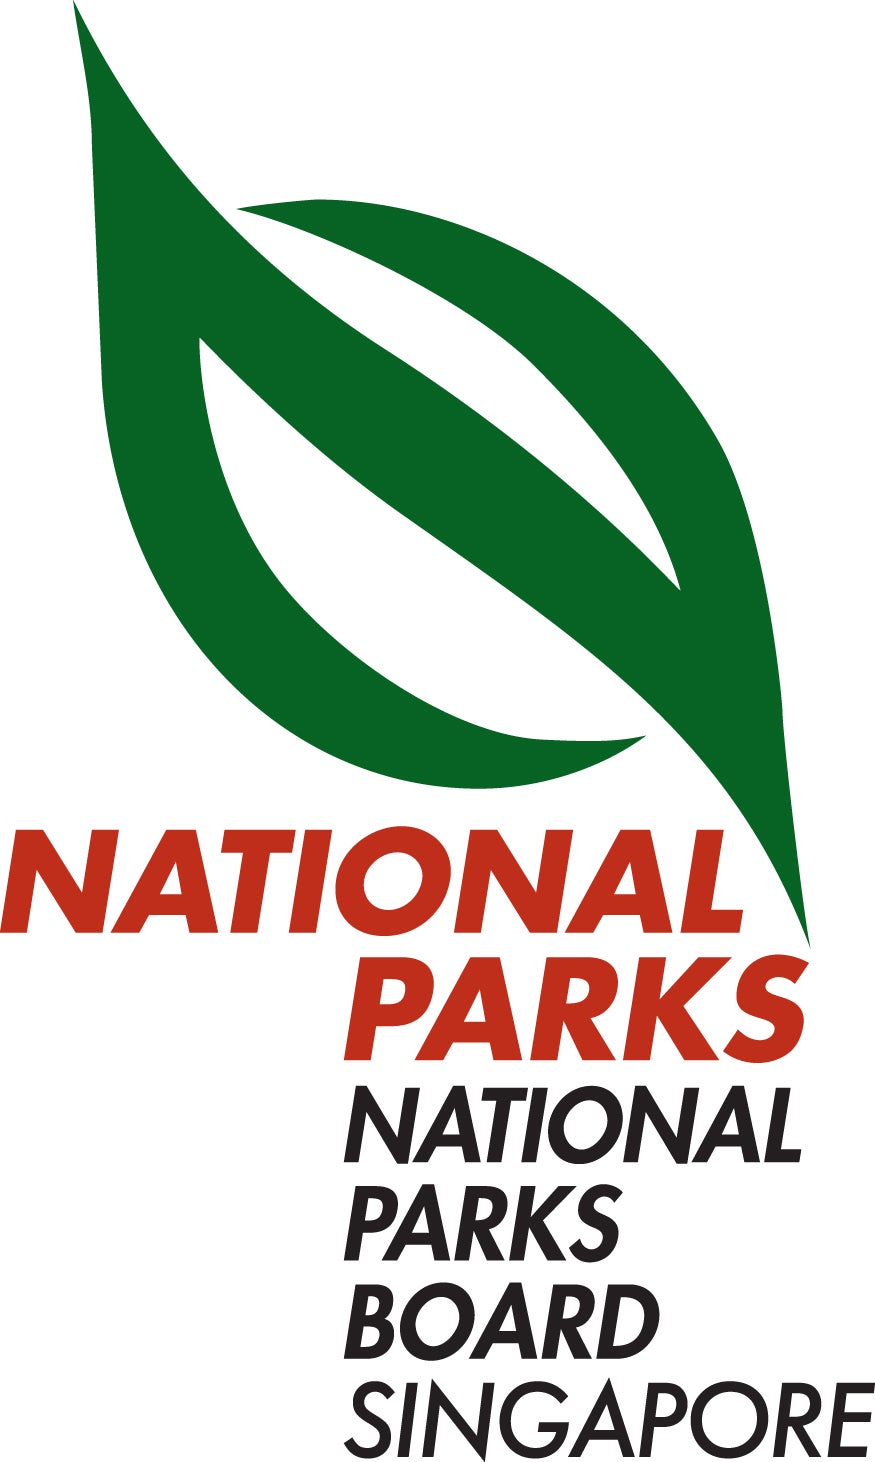 NATIONAL PARKS BOARD SINGAPORE